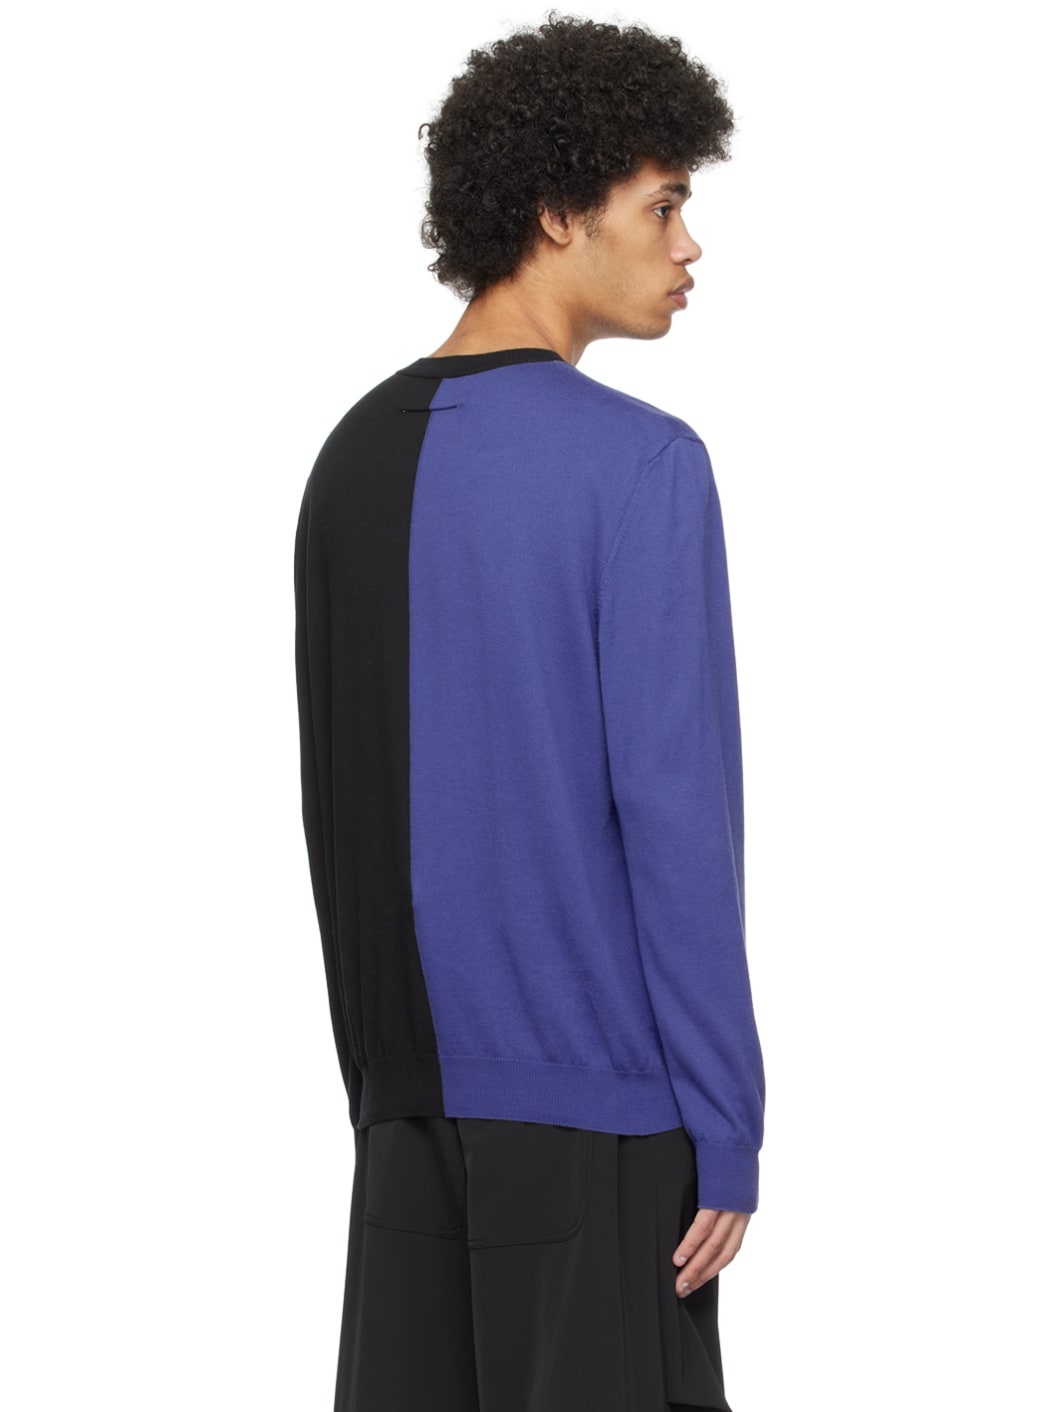 Black & Navy Two-Tone Sweater - 3